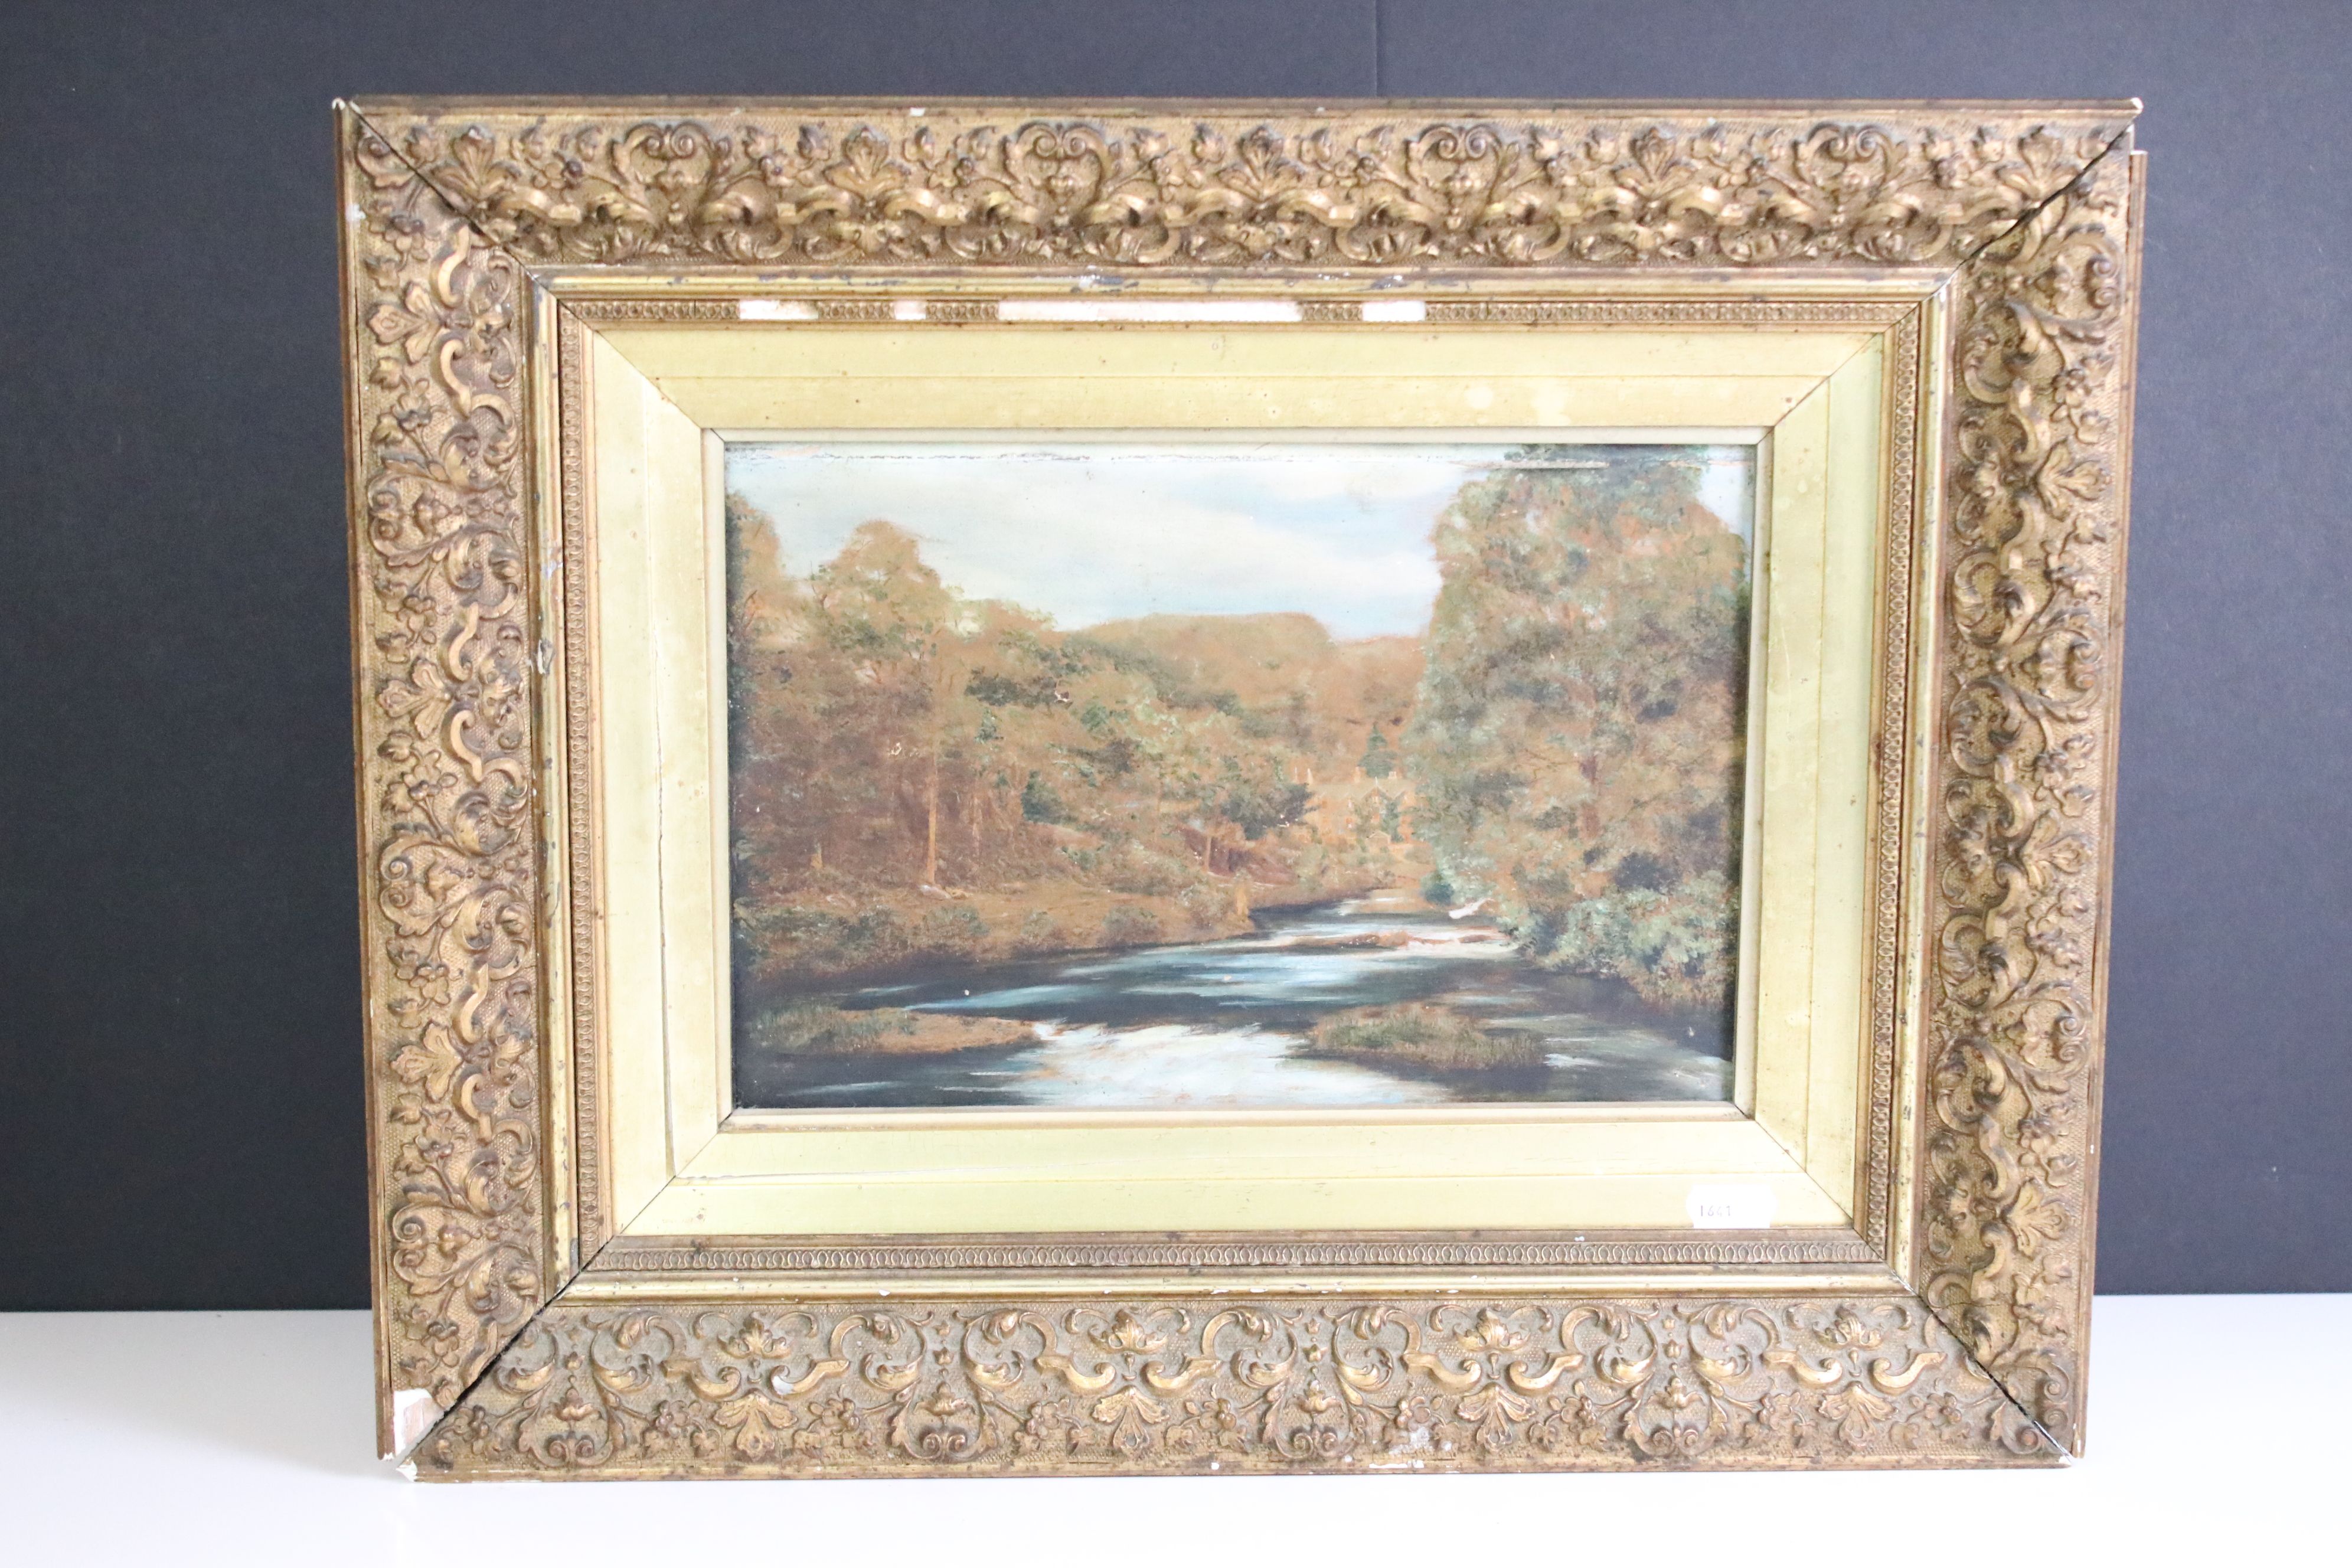 Late 19th / Early 20th century Oil on Canvas of Landscape River Scene, 19cm x 29cm, gilt framed